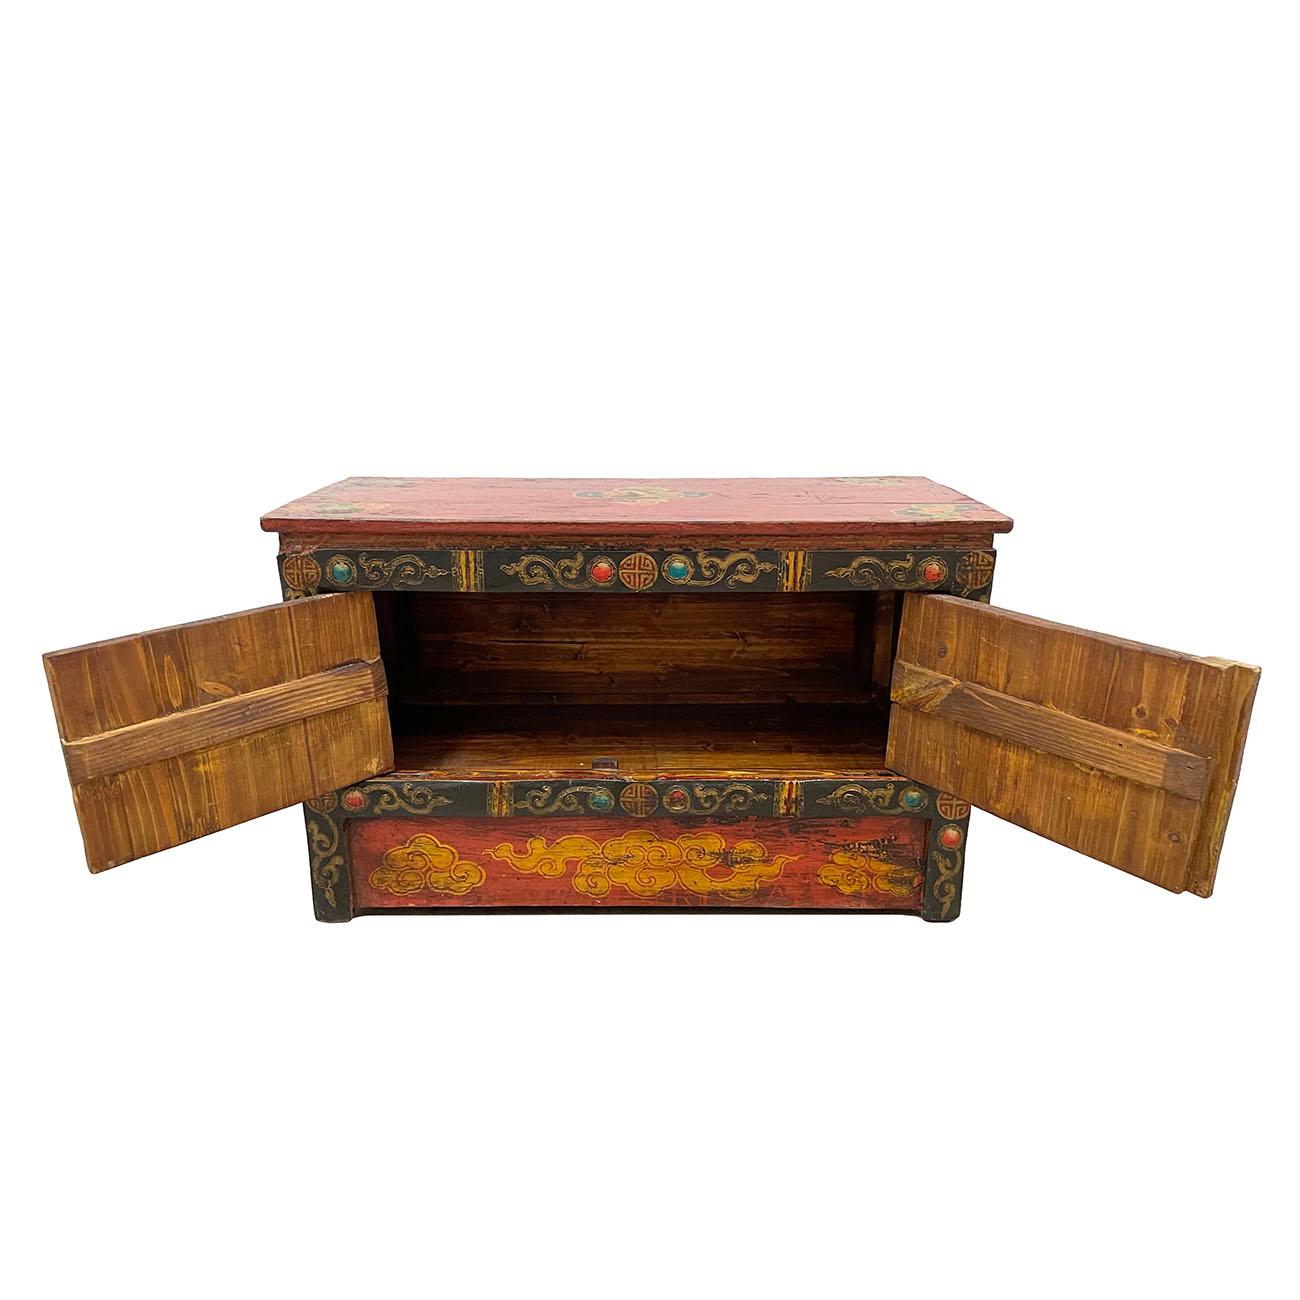 This antique Tibetan coffee table is 100% hand made and hand painted the traditional Tibetan art - Tibetan Animals and floral design on all four sides and top using mineral painting which last the paint a much longer time. You can see from the